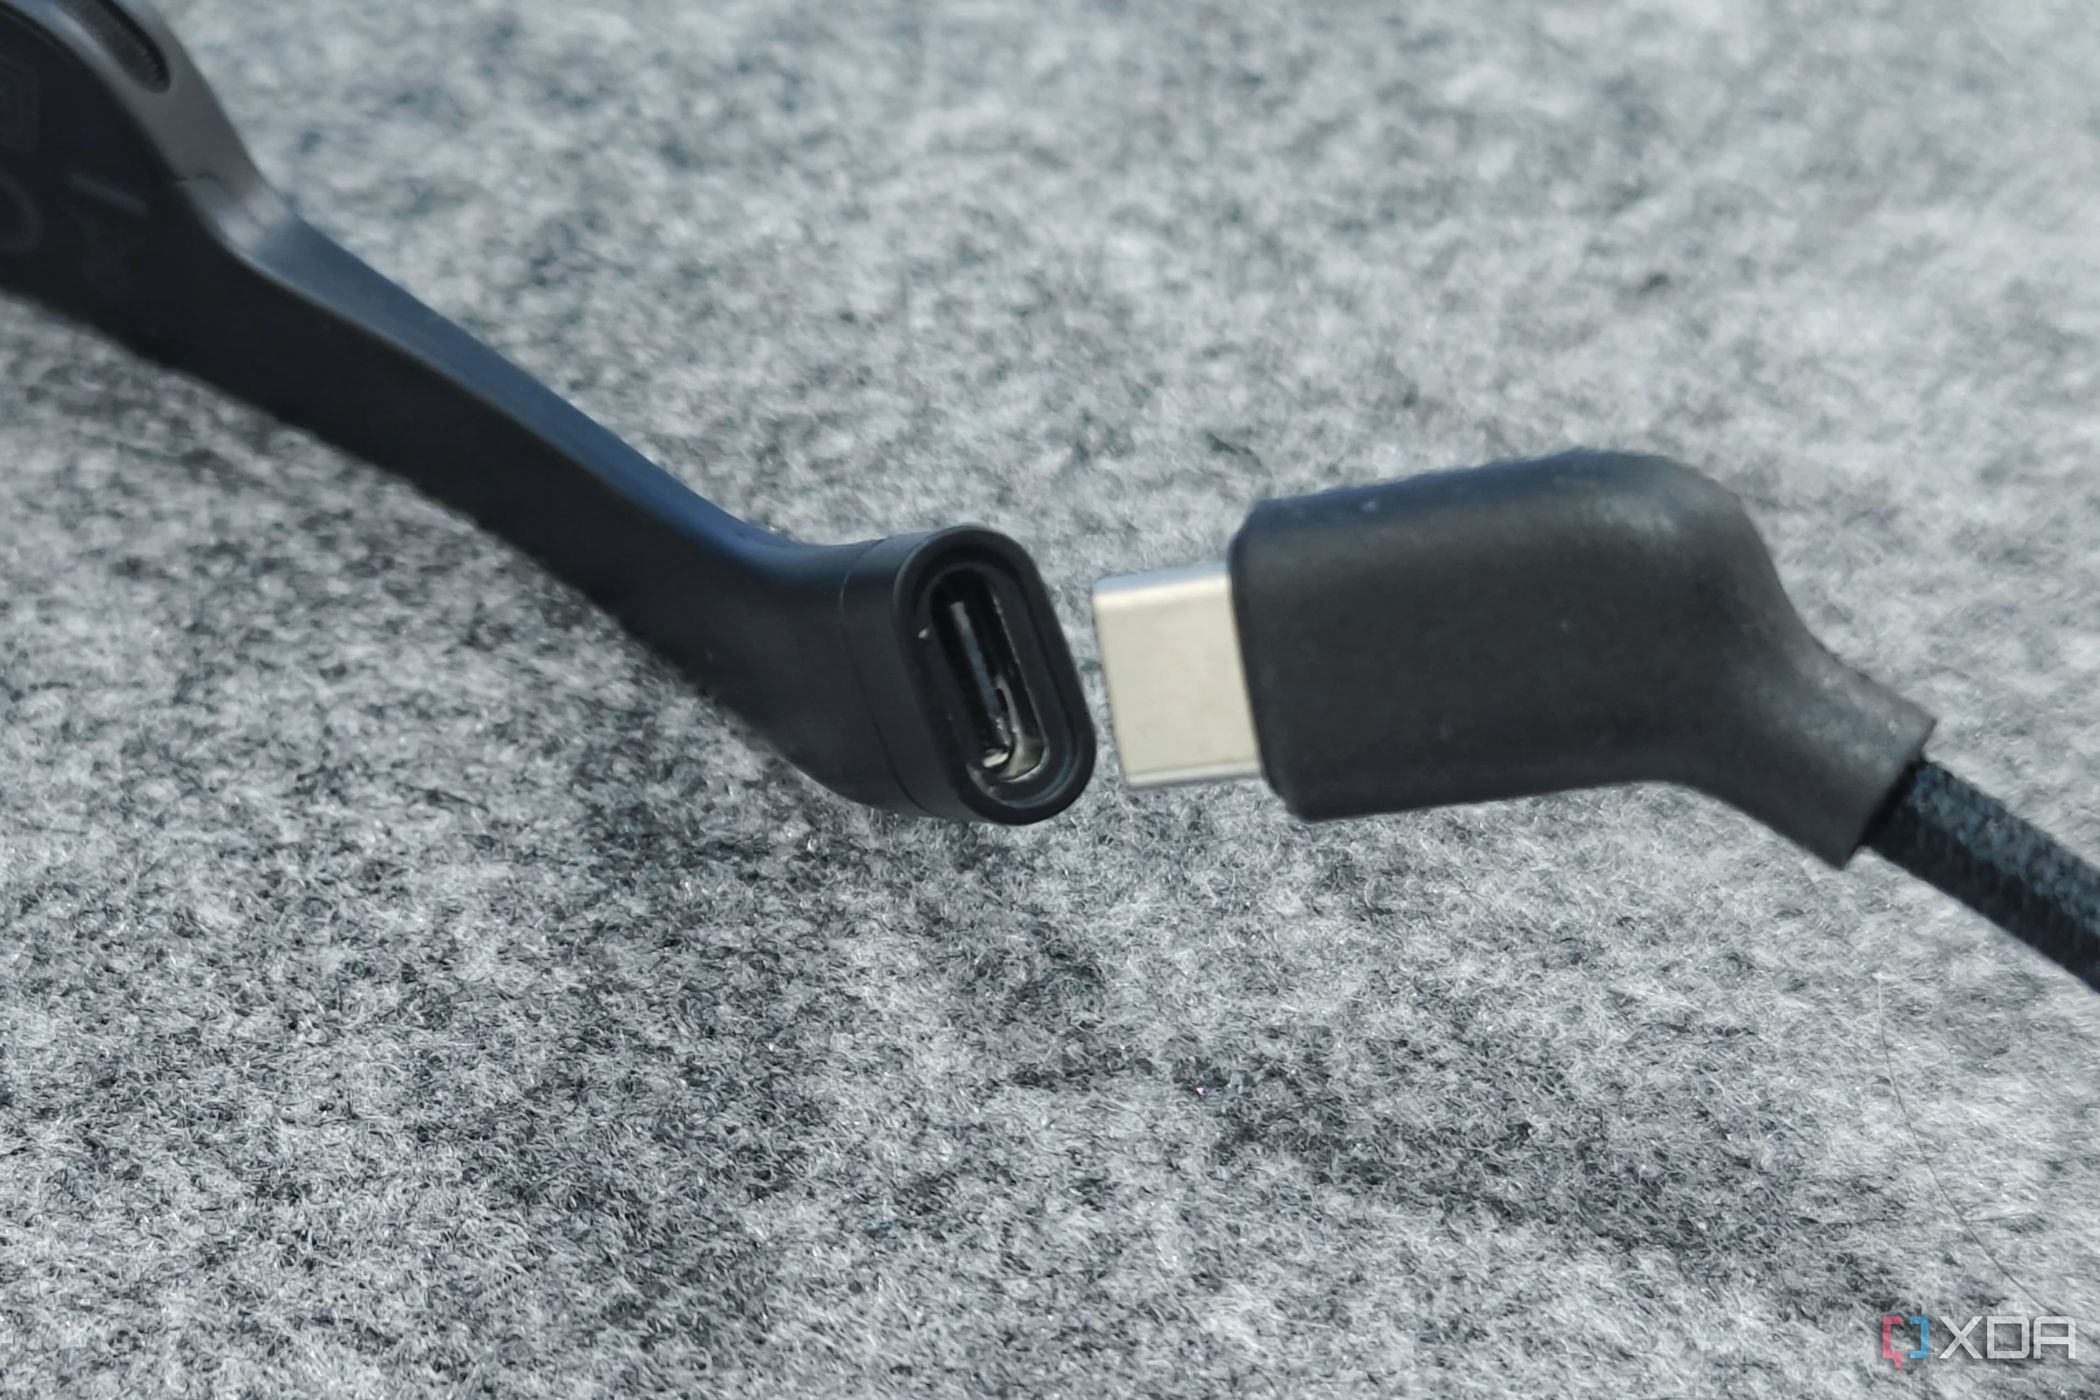 An image showing the XREAL Air 2's USB-C port next to an angled connector.